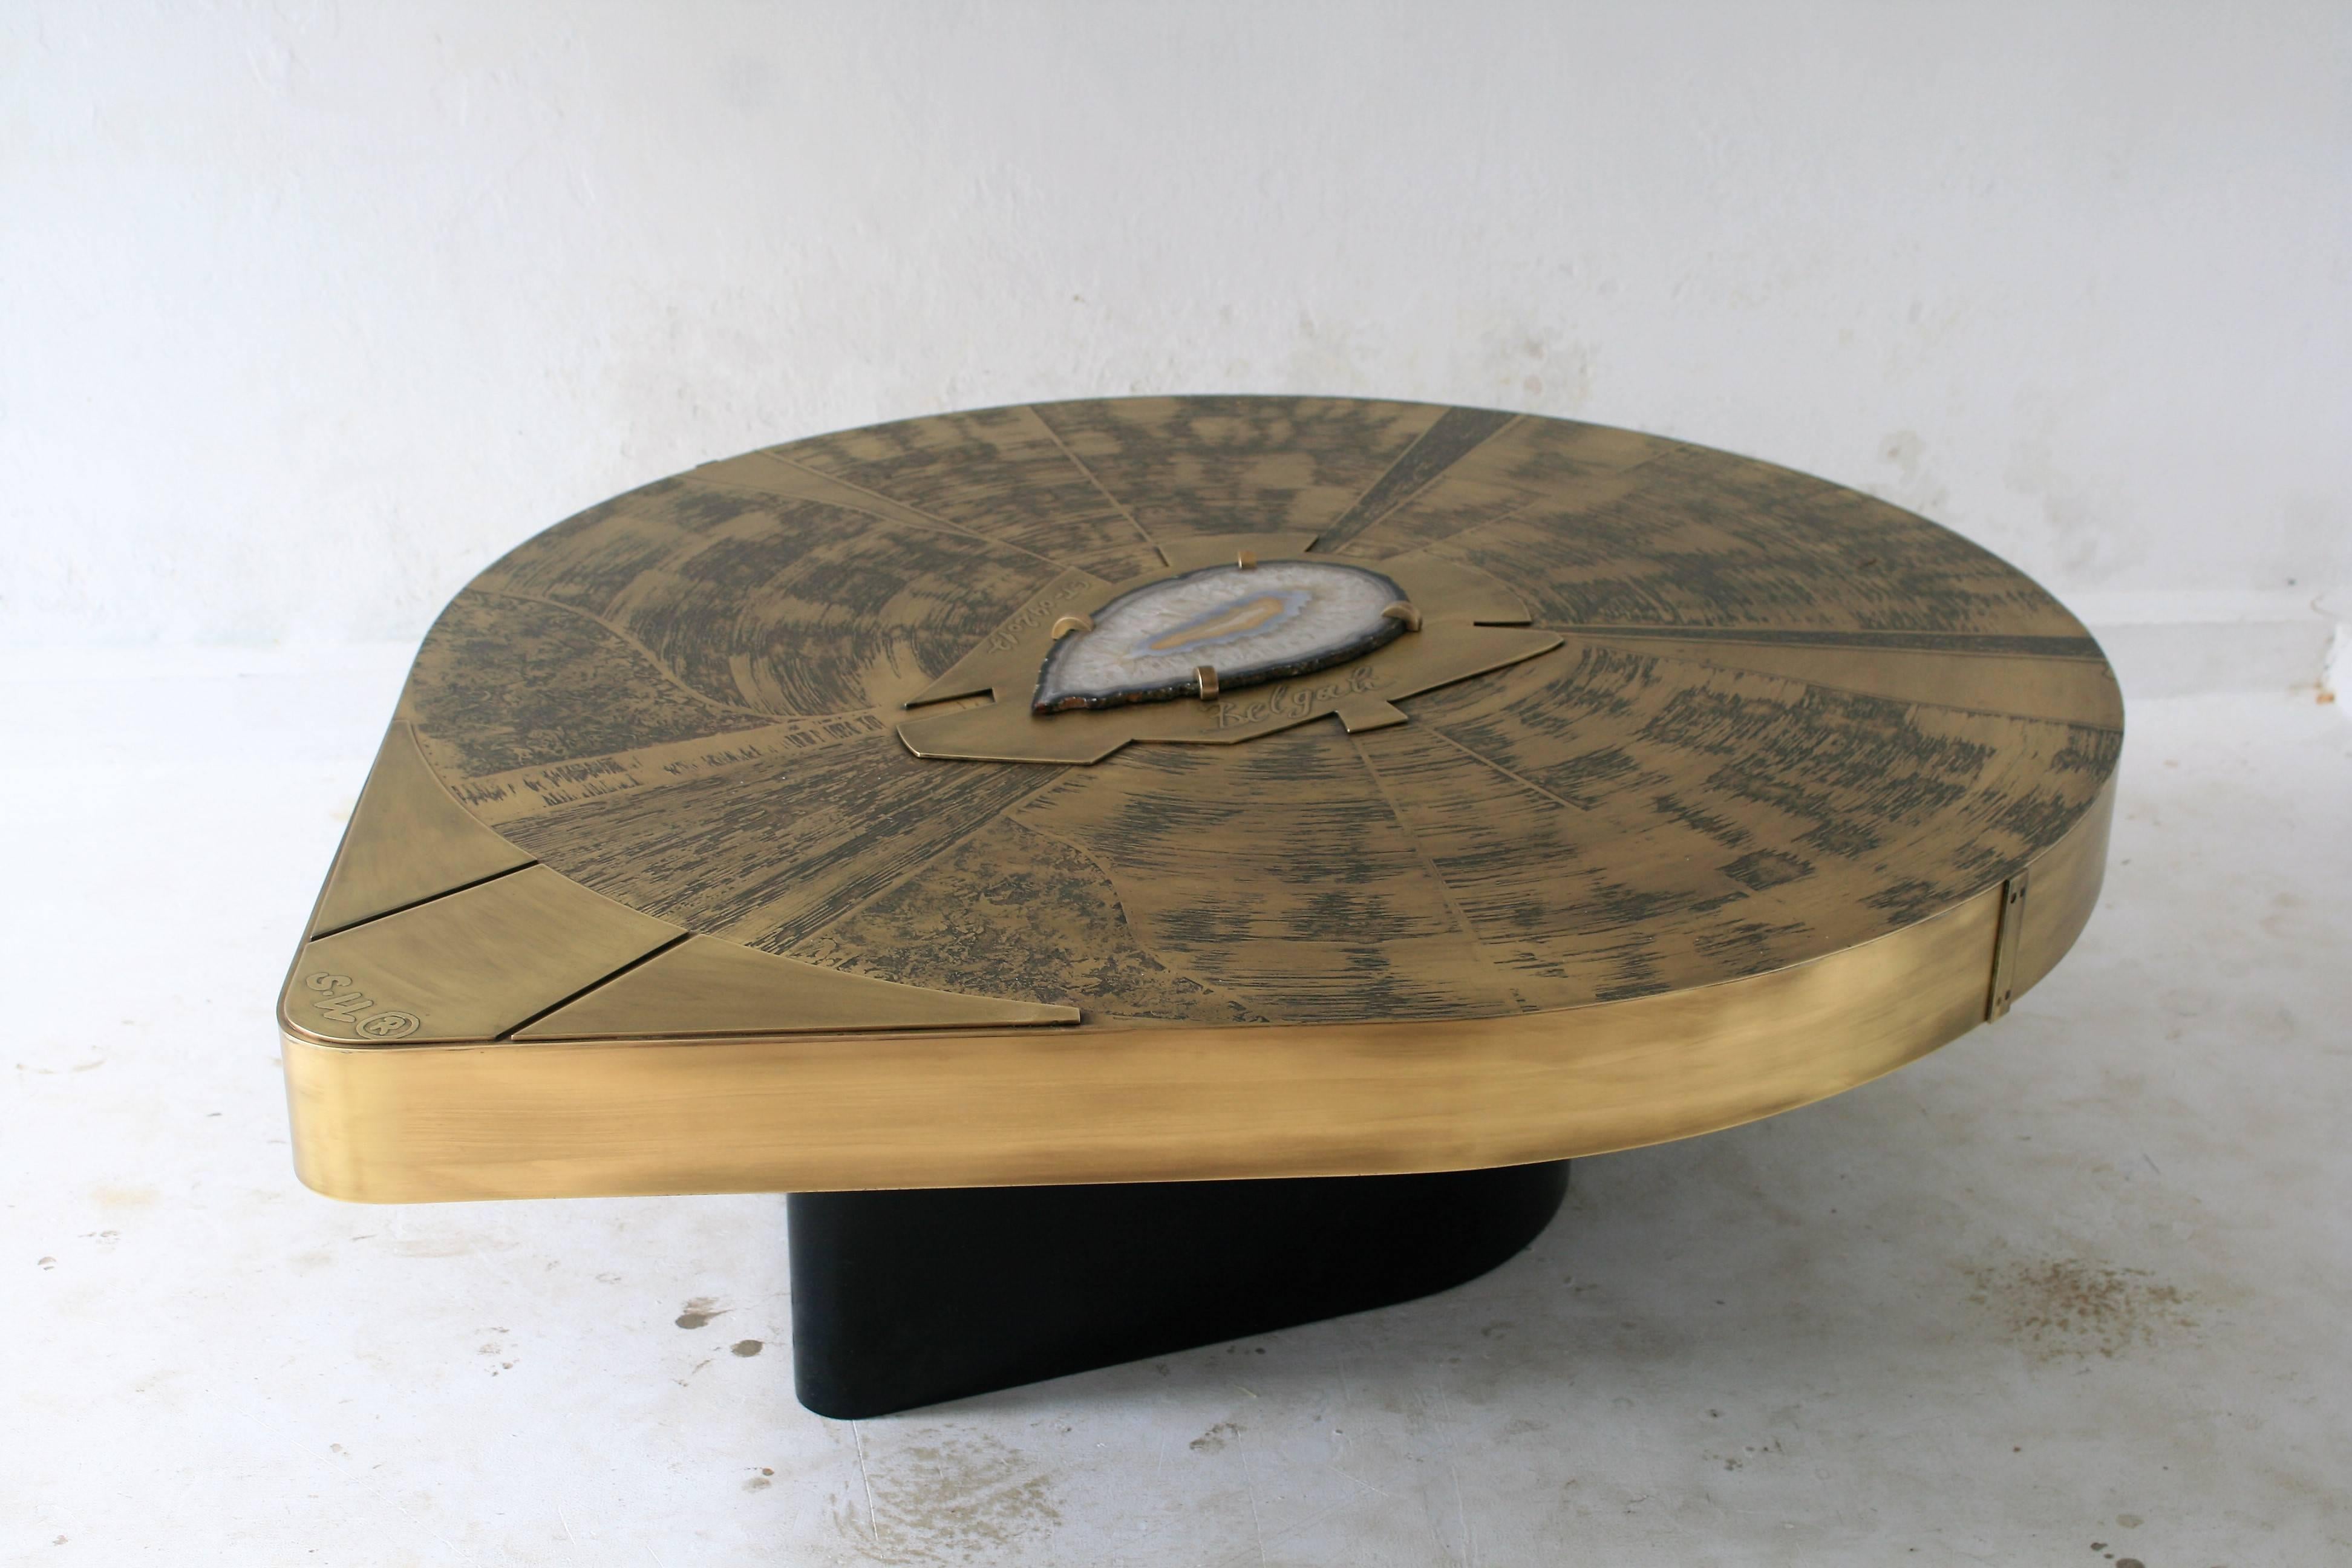 Belgali is a Belgian producer of brass handmade furniture. Mostly acid etched designs, finished with high quality rare semi precious gems. 

The tables can be made to order, each have a slice of agate. They are available for production in acid